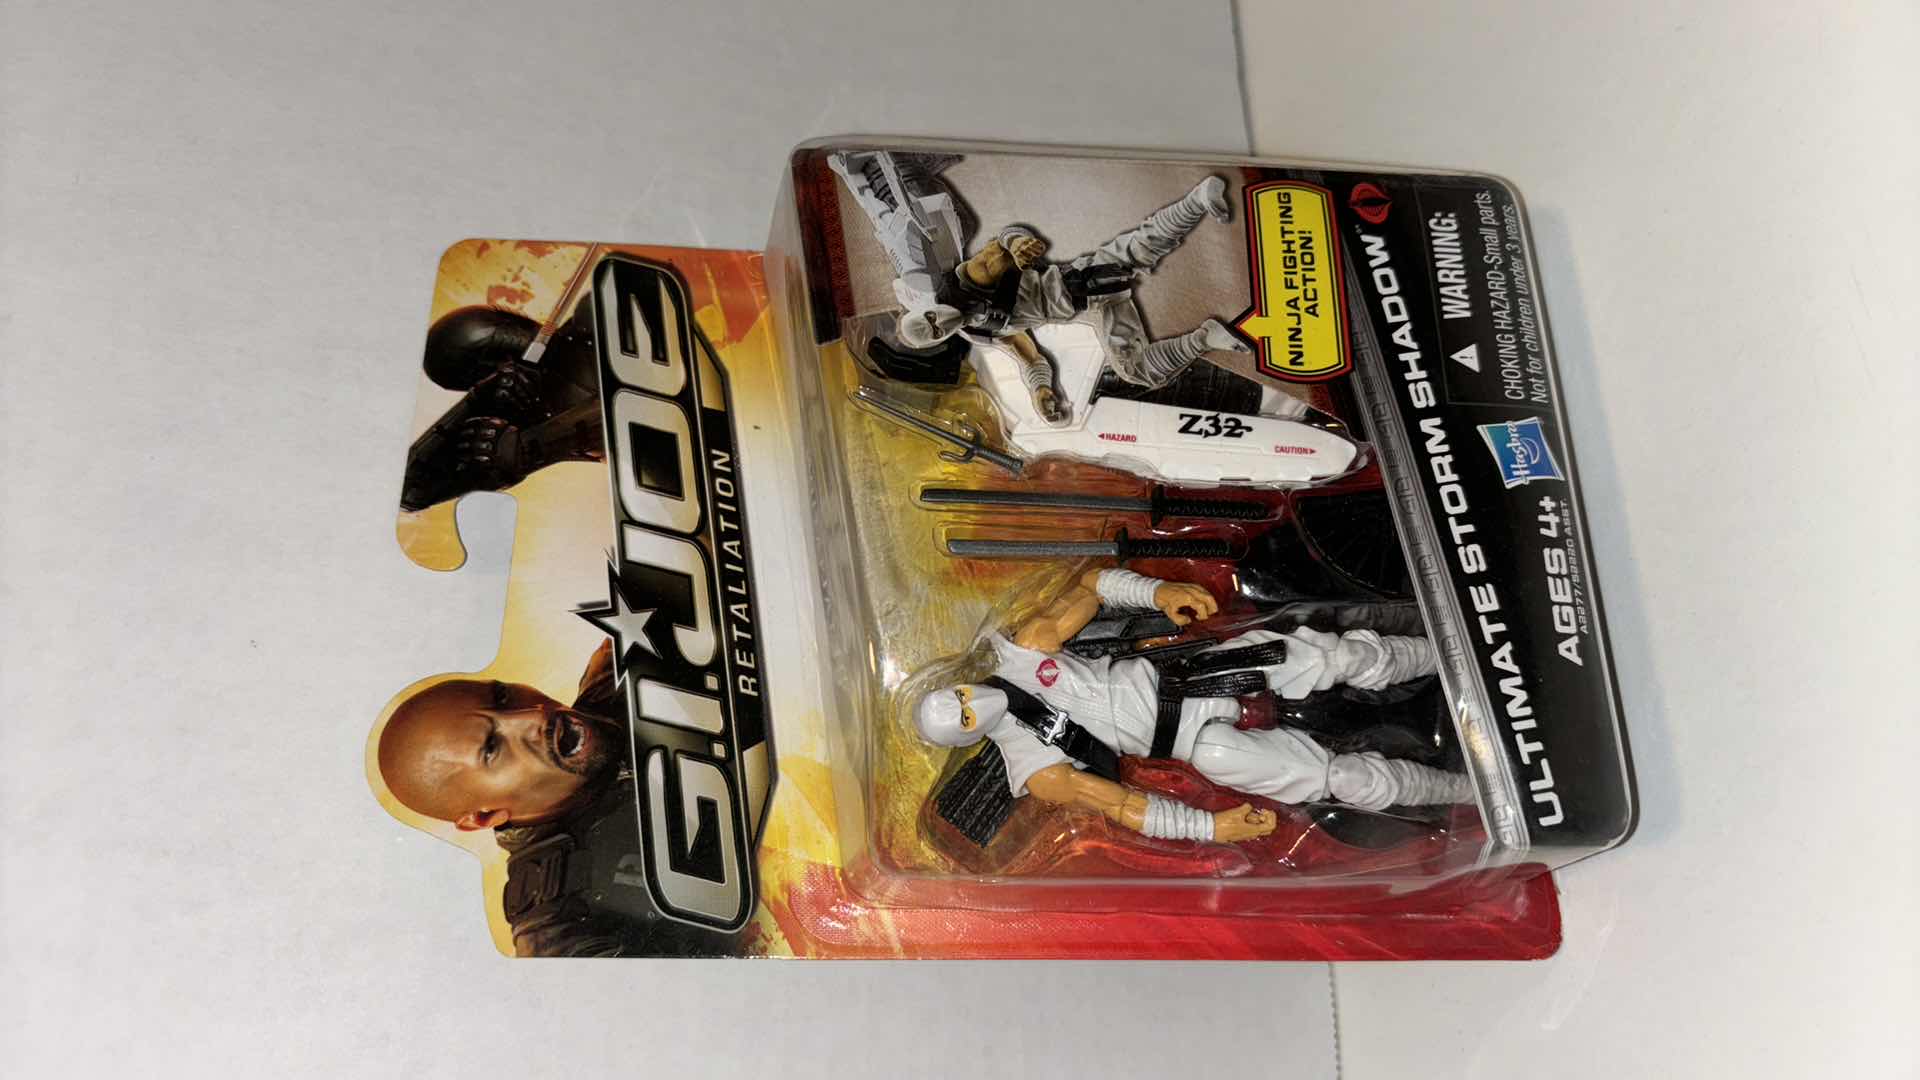 Photo 2 of NEW 2012 HASBRO G.I. JOE RETALIATION ACTION FIGURE & ACCESSORIES “ULTIMATE STORM SHADOW” IN PROTECTIVE CLEAR CLAMSHELL CASE